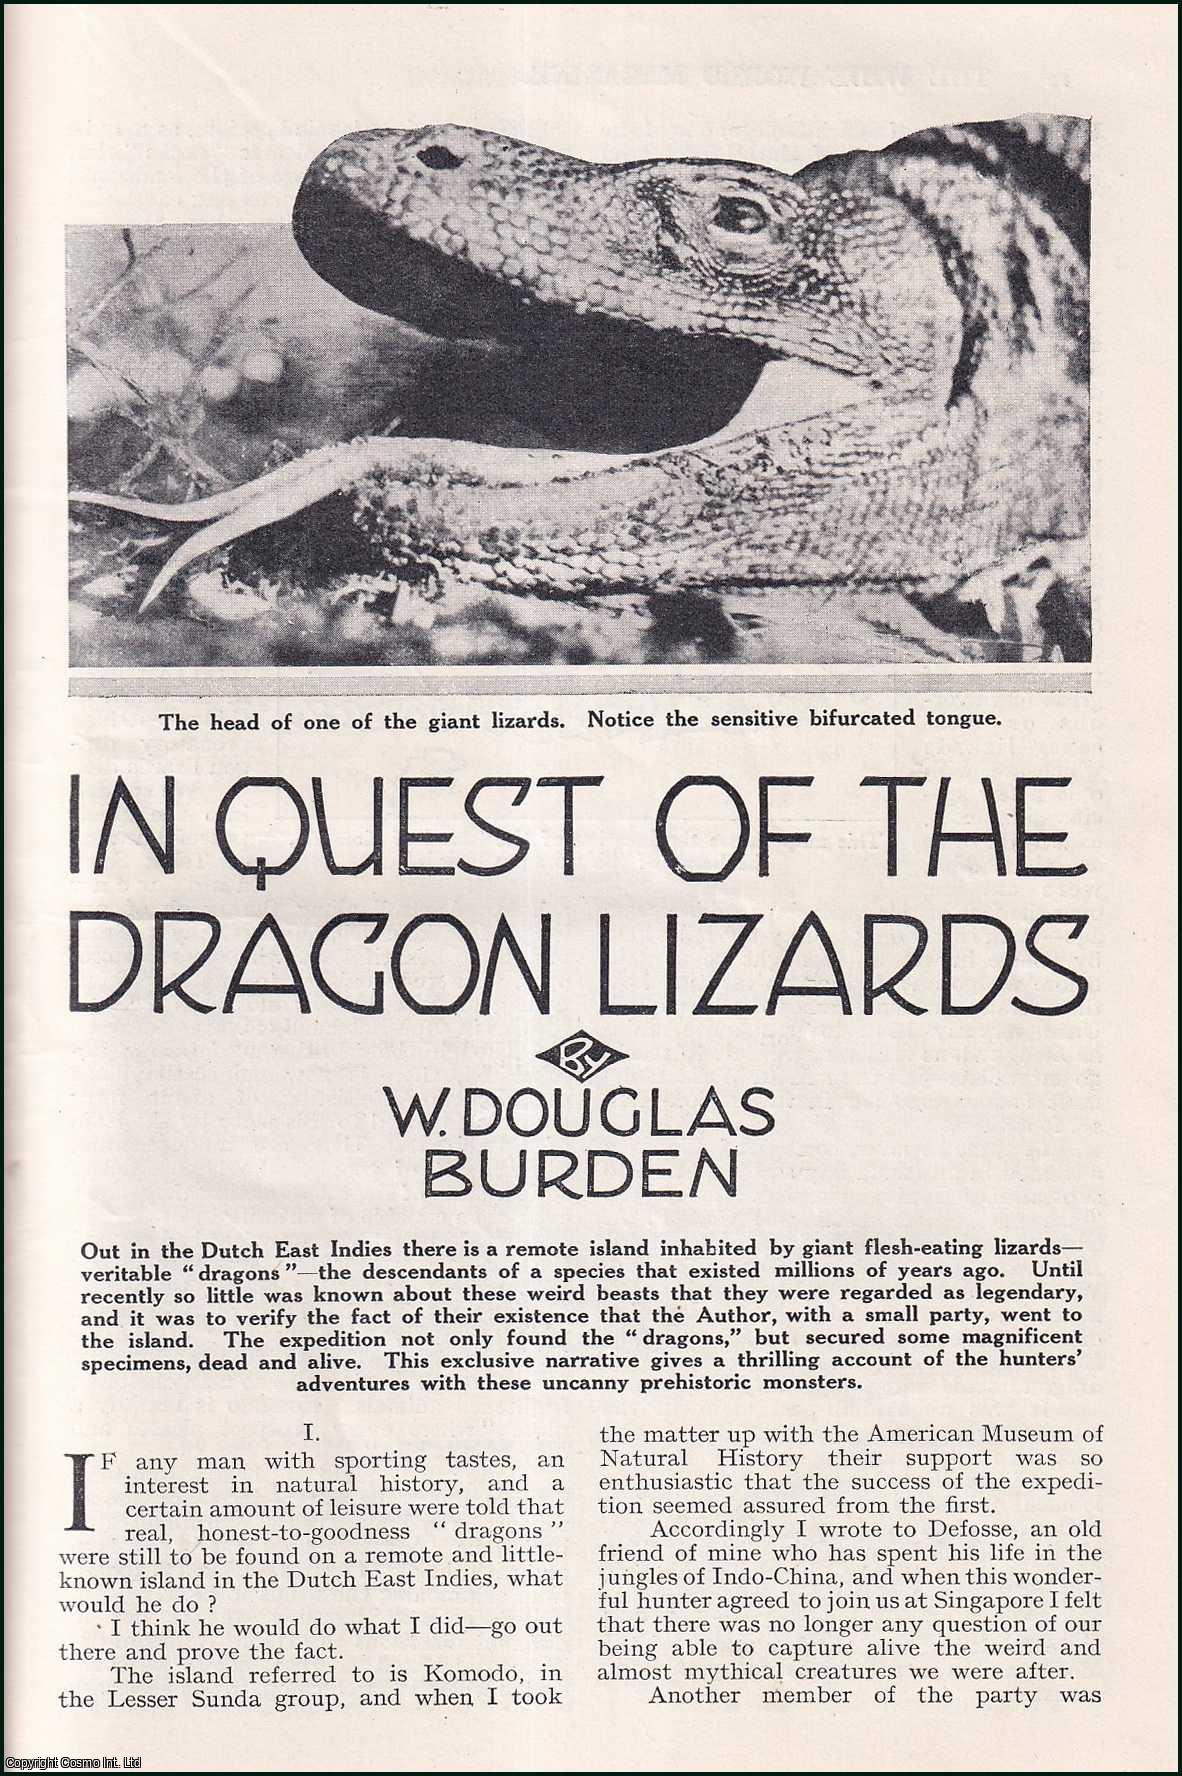 W. Douglas Burden - Inquest of the Flesh-Eating Dragon Lizards, out in the Dutch East Indies. A complete 2 part uncommon original article from the Wide World Magazine, 1928.